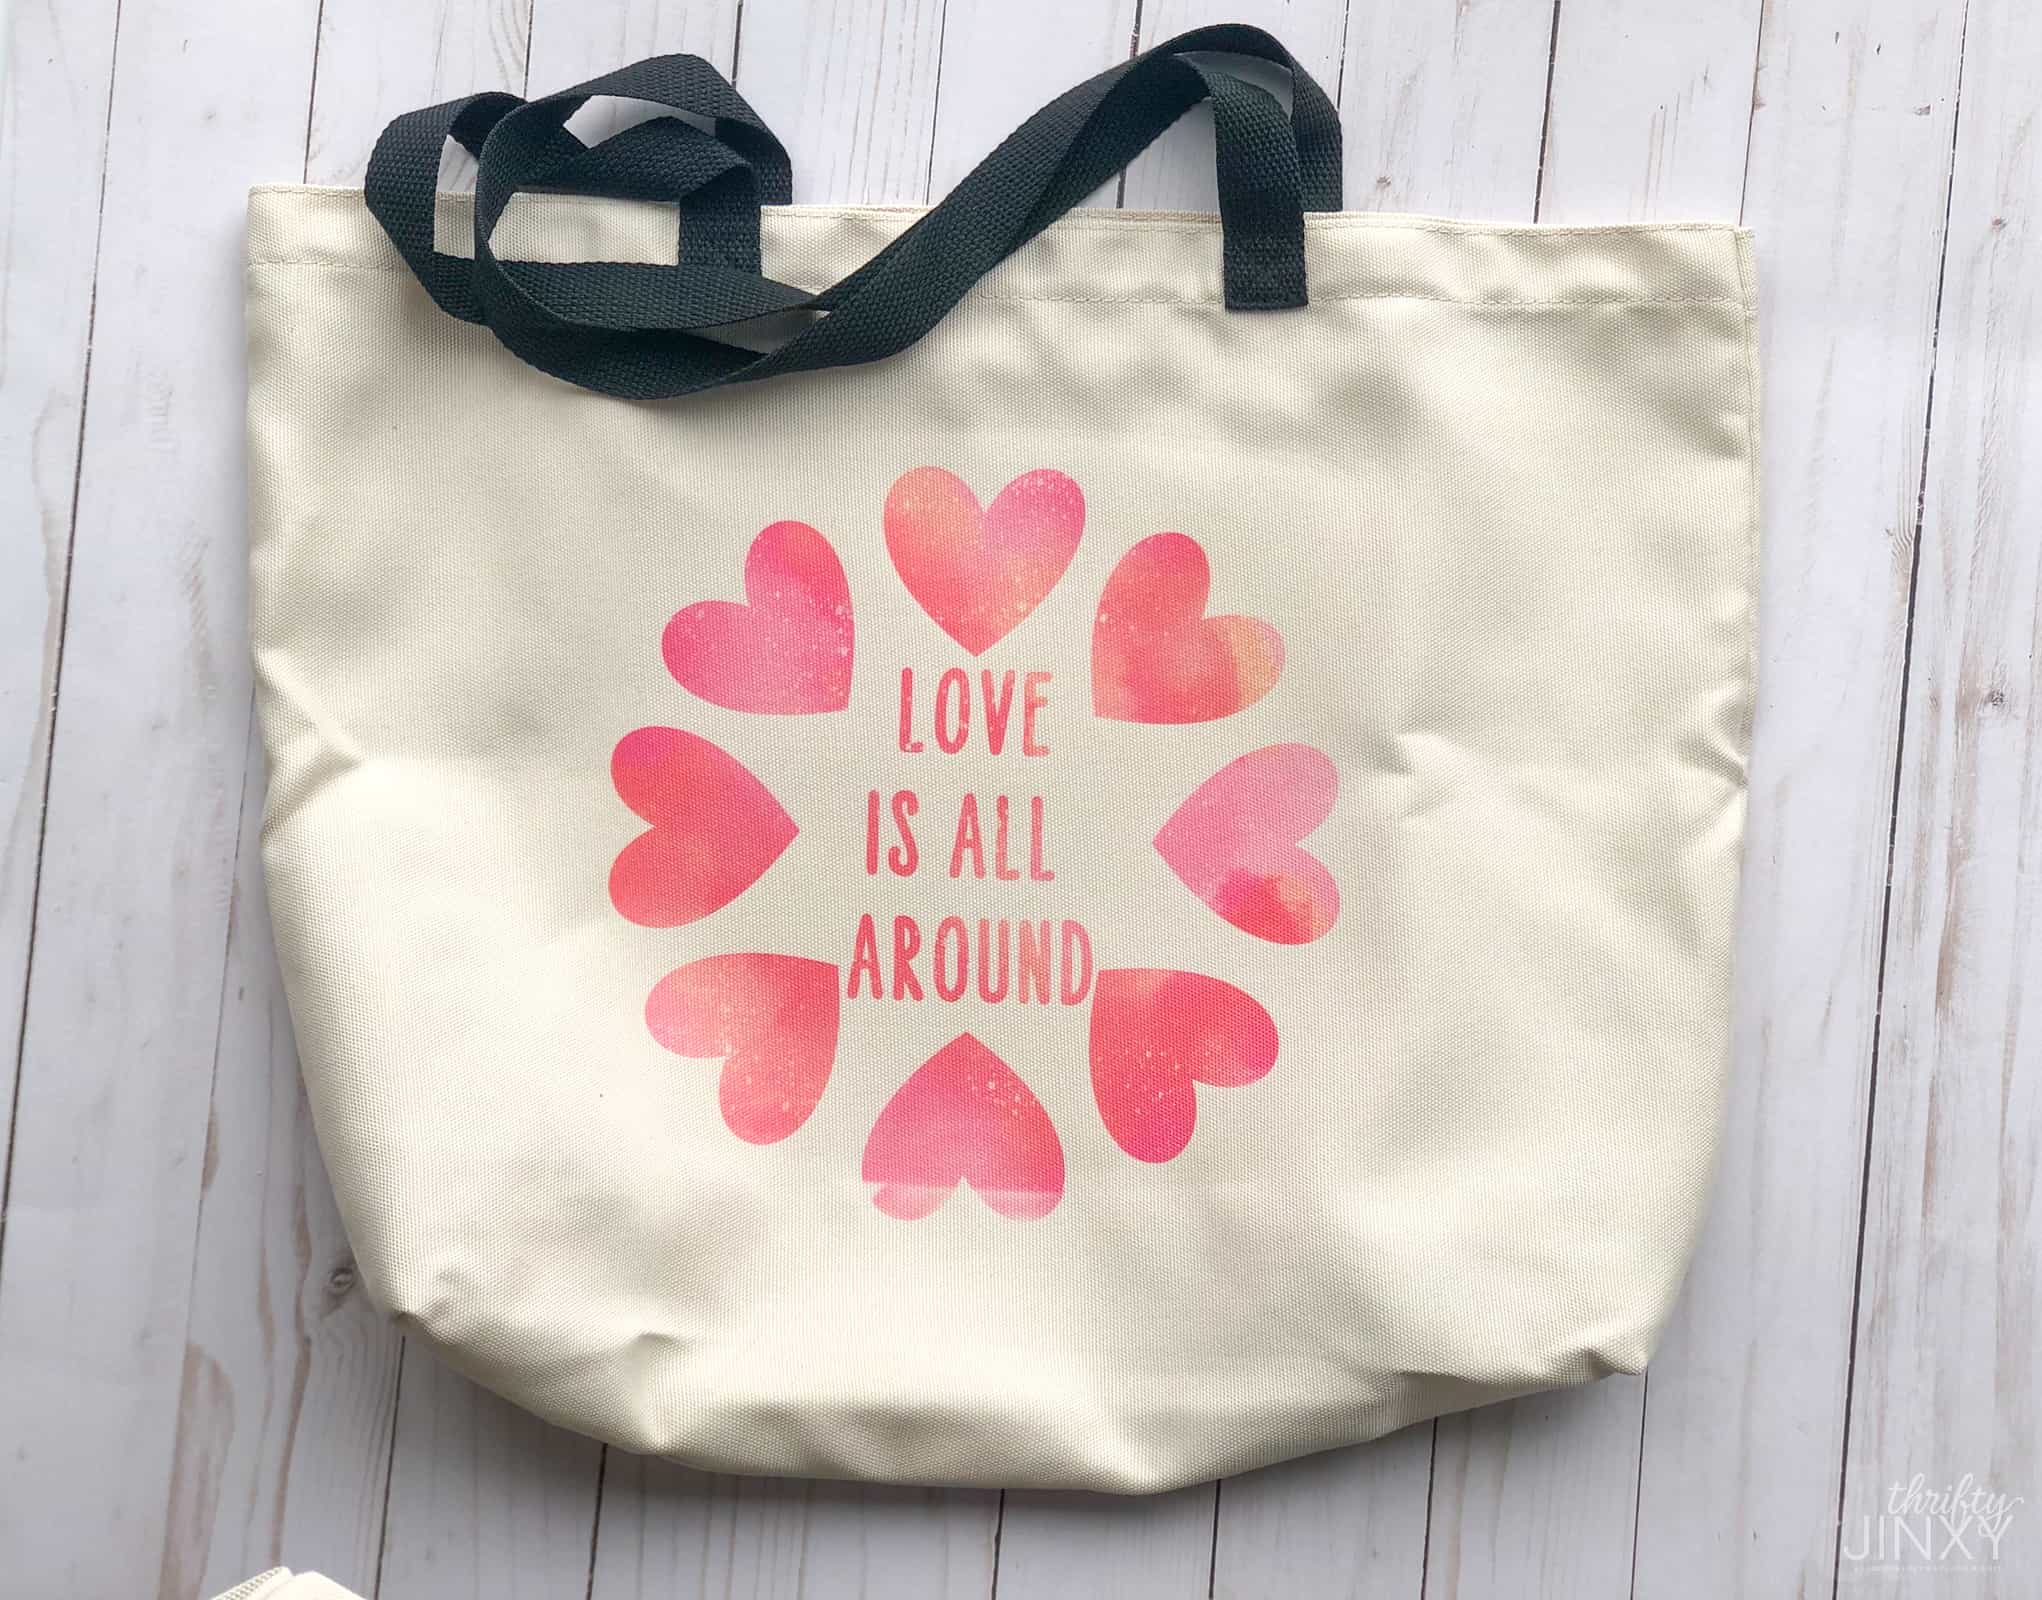 Make Cricut Infusible Ink Tote Bags and Help Fight Hunger